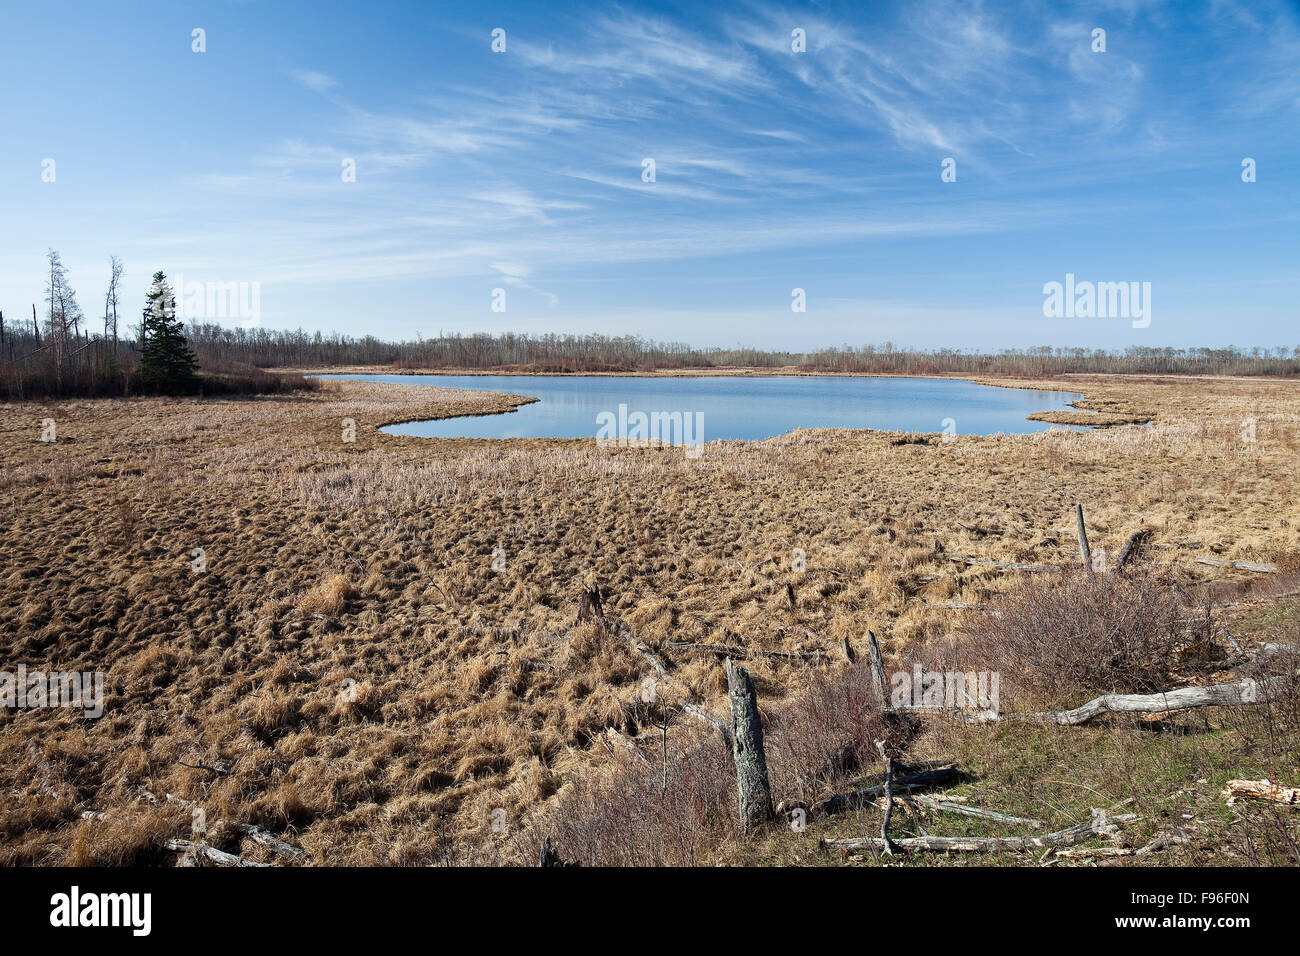 Pond and Meadow on a clear day Elk Island National Park, Alberta, Canada Stock Photo